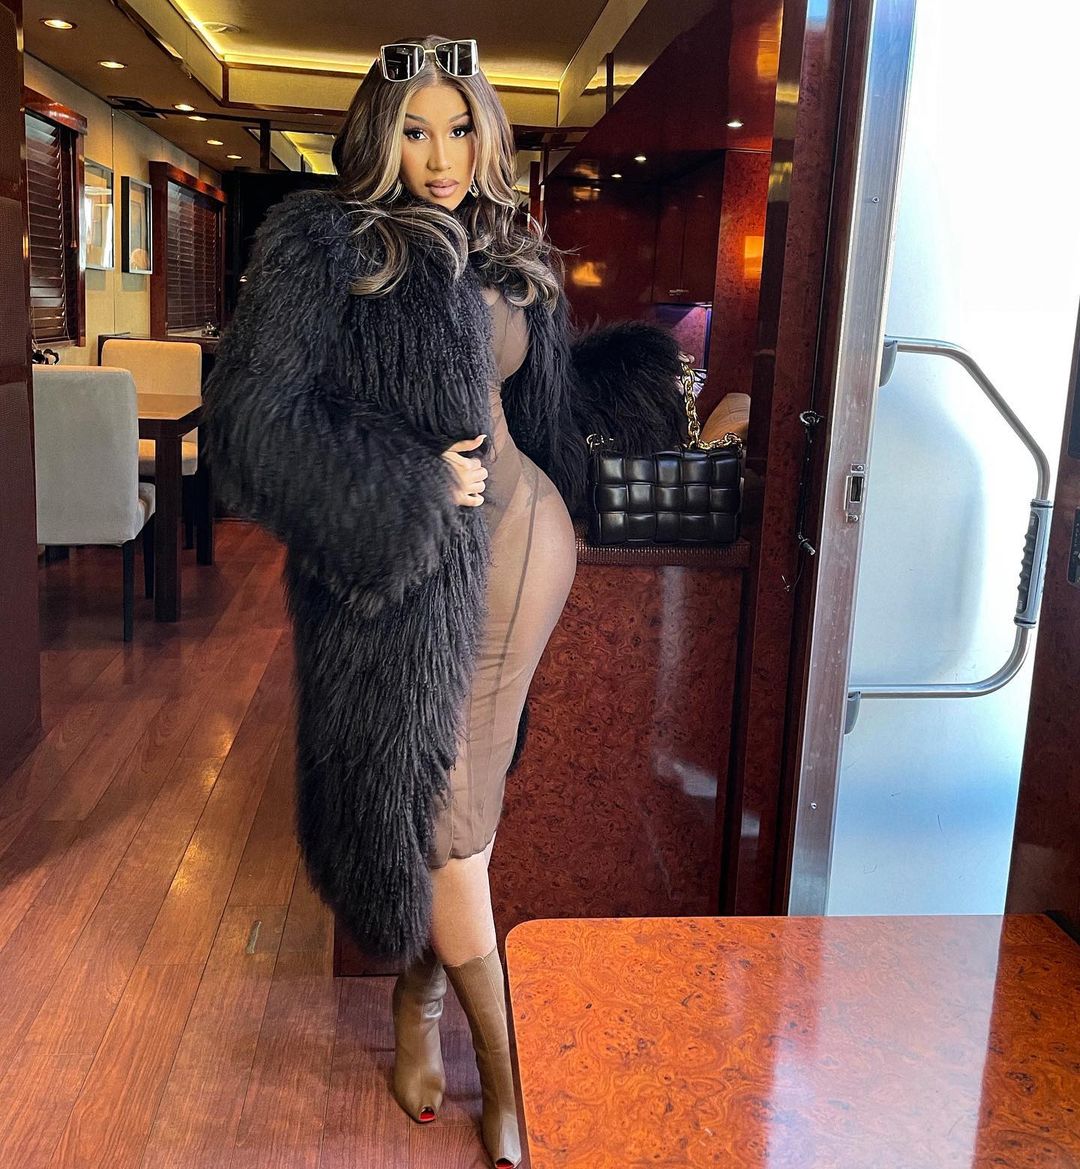 Cardi B is Ready to Go Home! - Photo 2